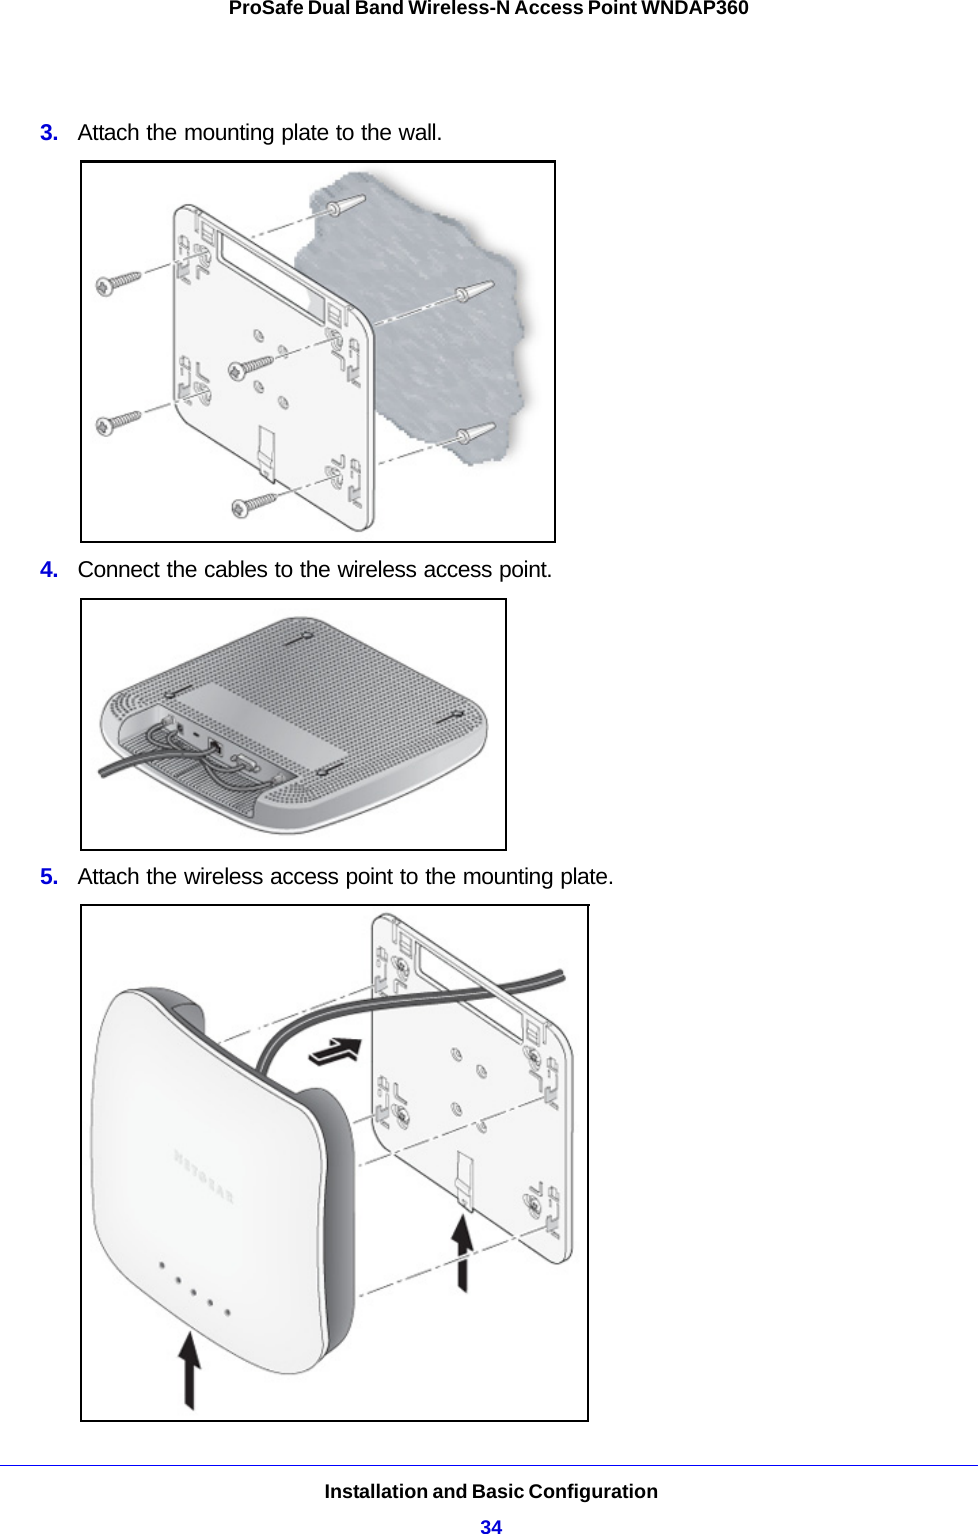 Installation and Basic Configuration34ProSafe Dual Band Wireless-N Access Point WNDAP360 3.  Attach the mounting plate to the wall.4.  Connect the cables to the wireless access point.5.  Attach the wireless access point to the mounting plate.